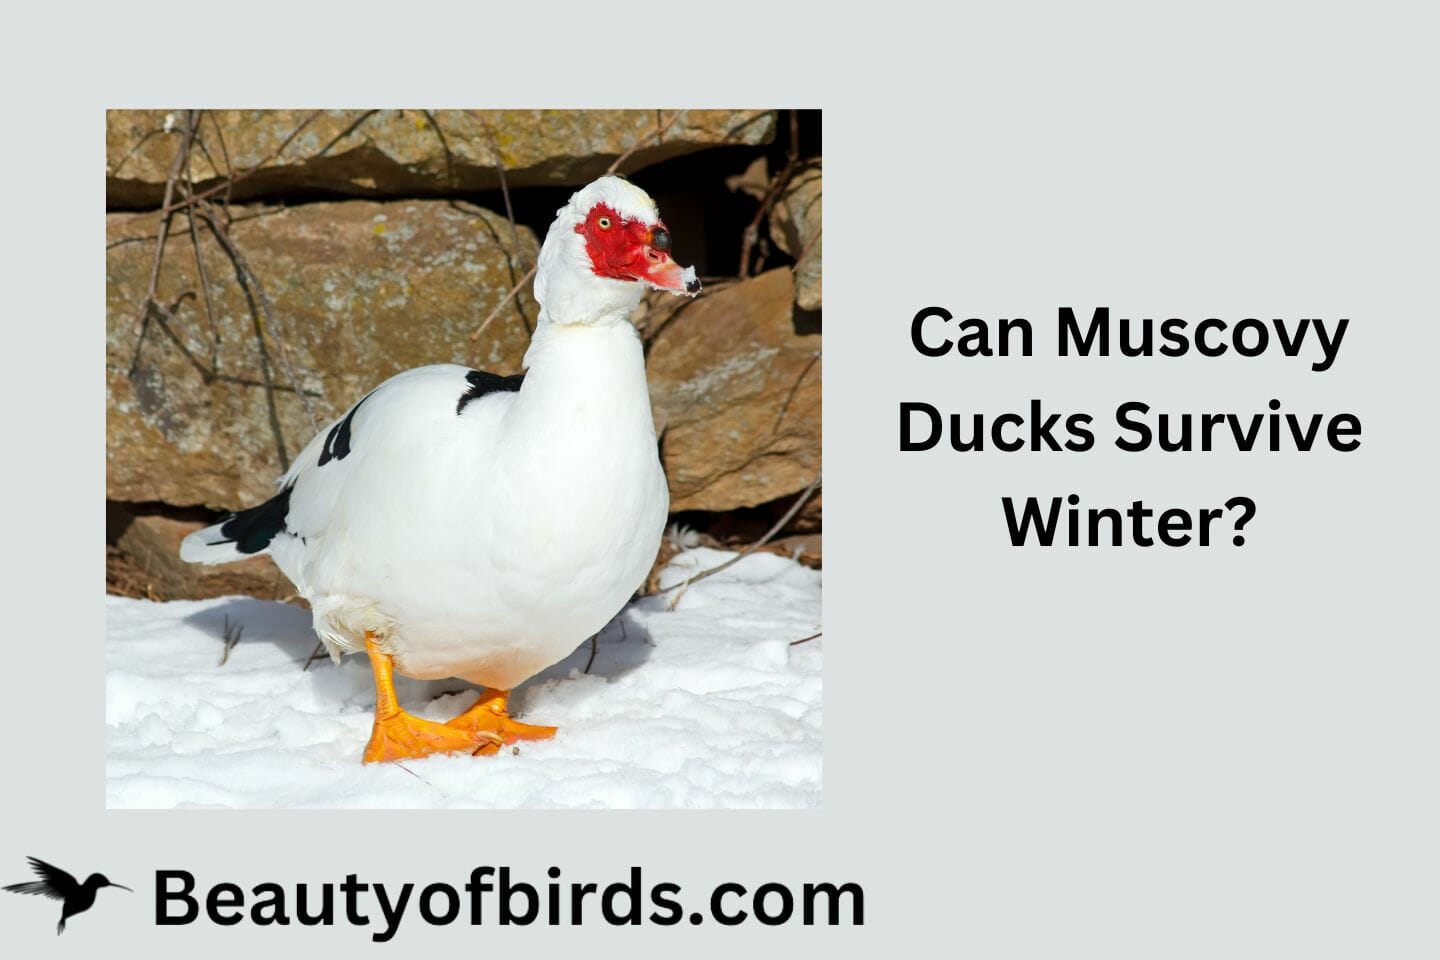 How to Care for Ducks in the Winter